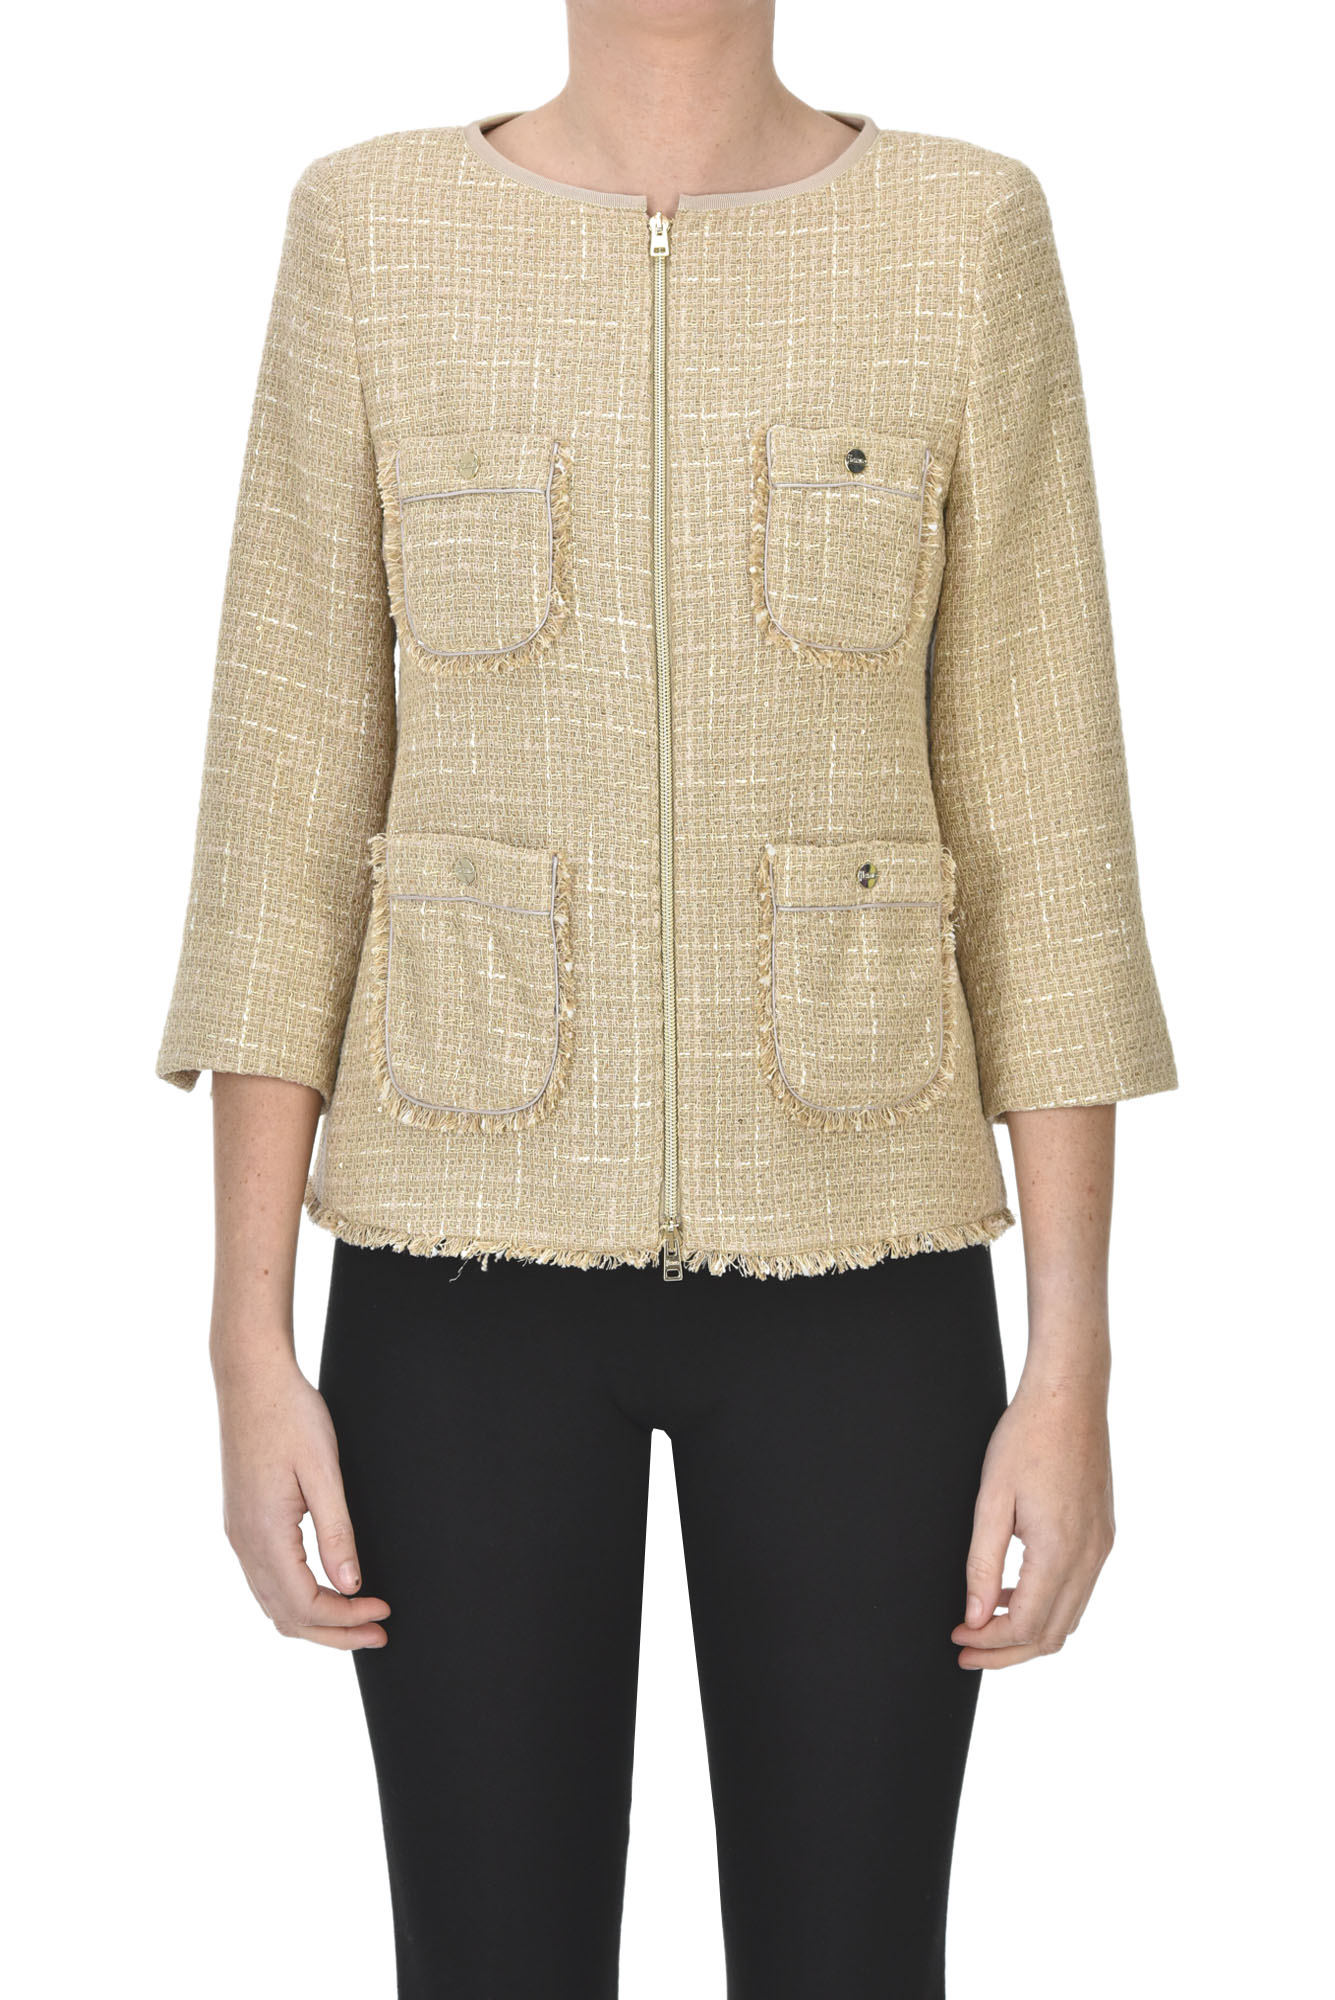 Herno Chanel Style Jacket In Beige